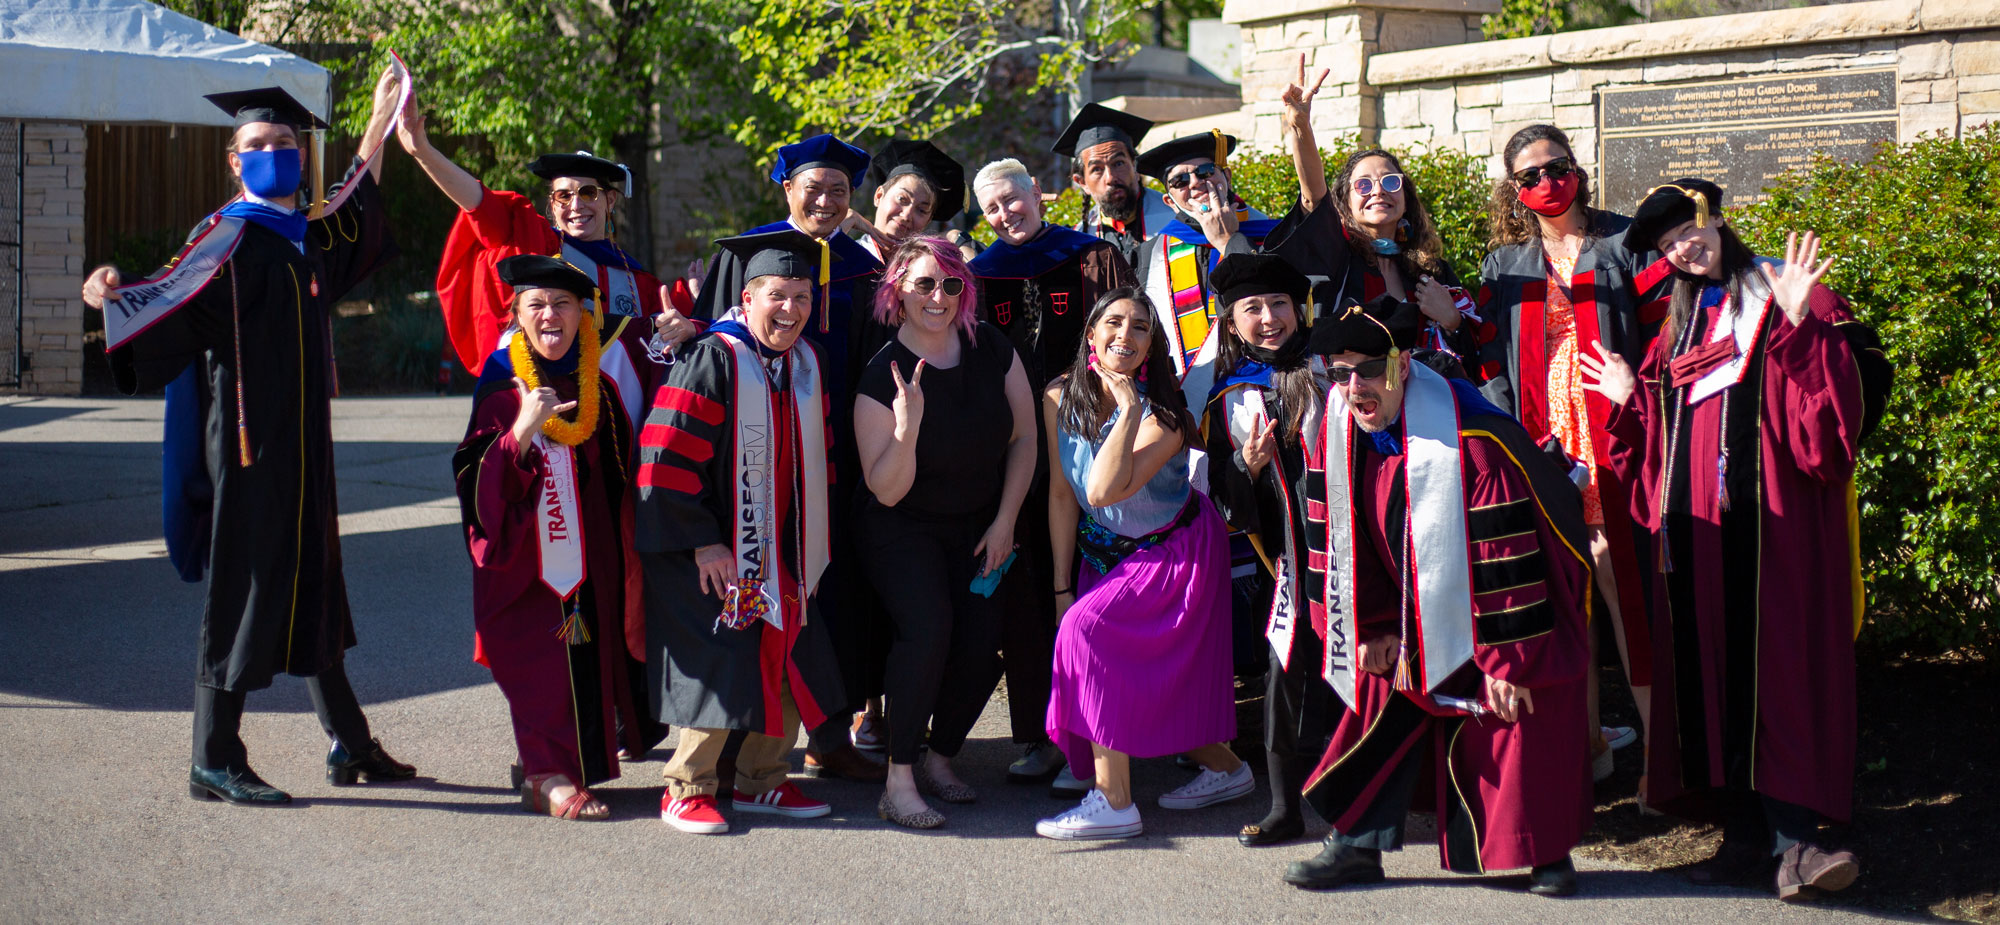 a group of Transform staff and faculty do a silly group photo in their graduation regalia at the Red Butte Gardens